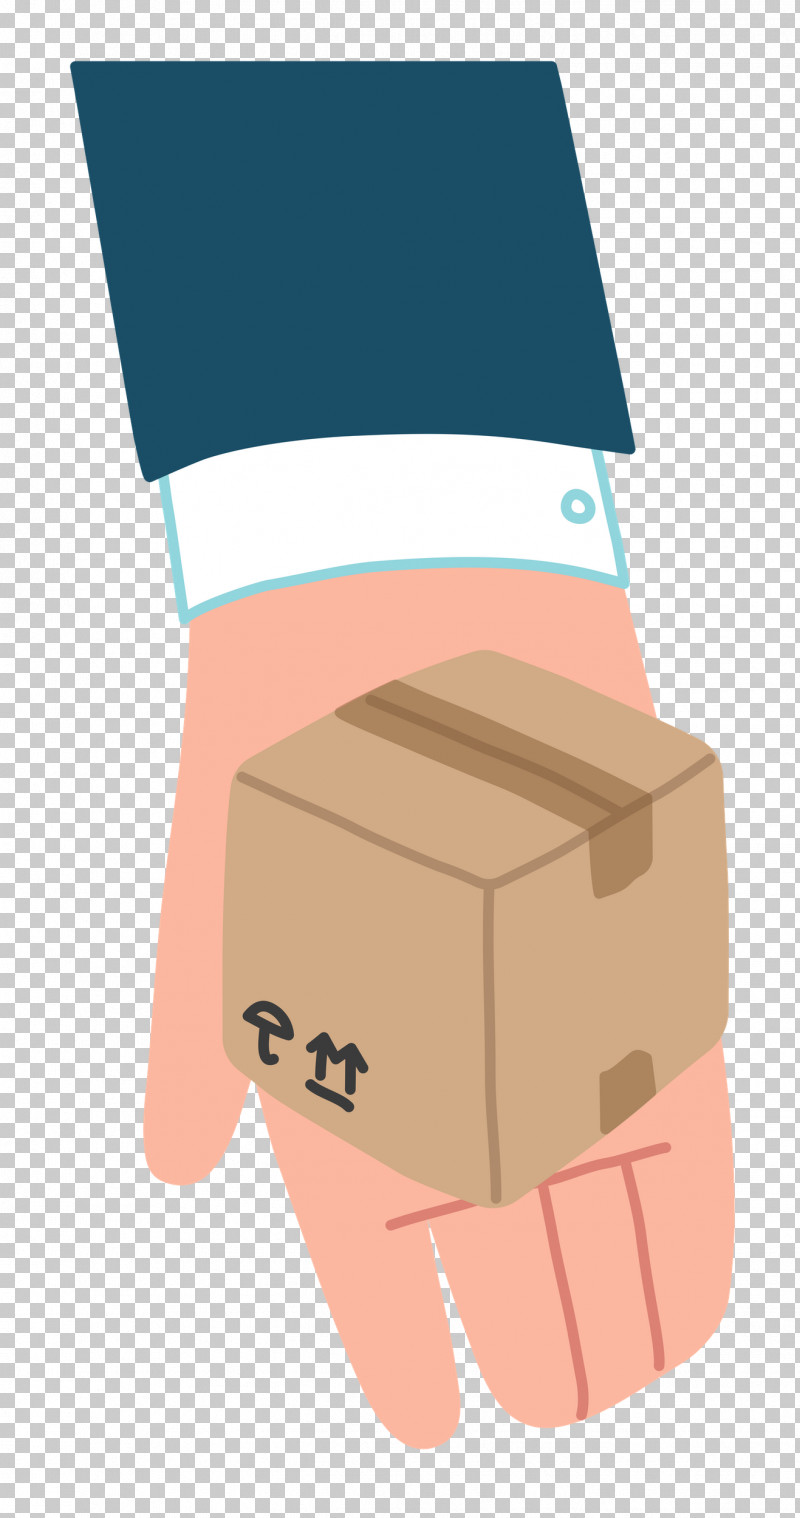 Hand Giving Box PNG, Clipart, Cartoon, Hm, Meter Free PNG Download